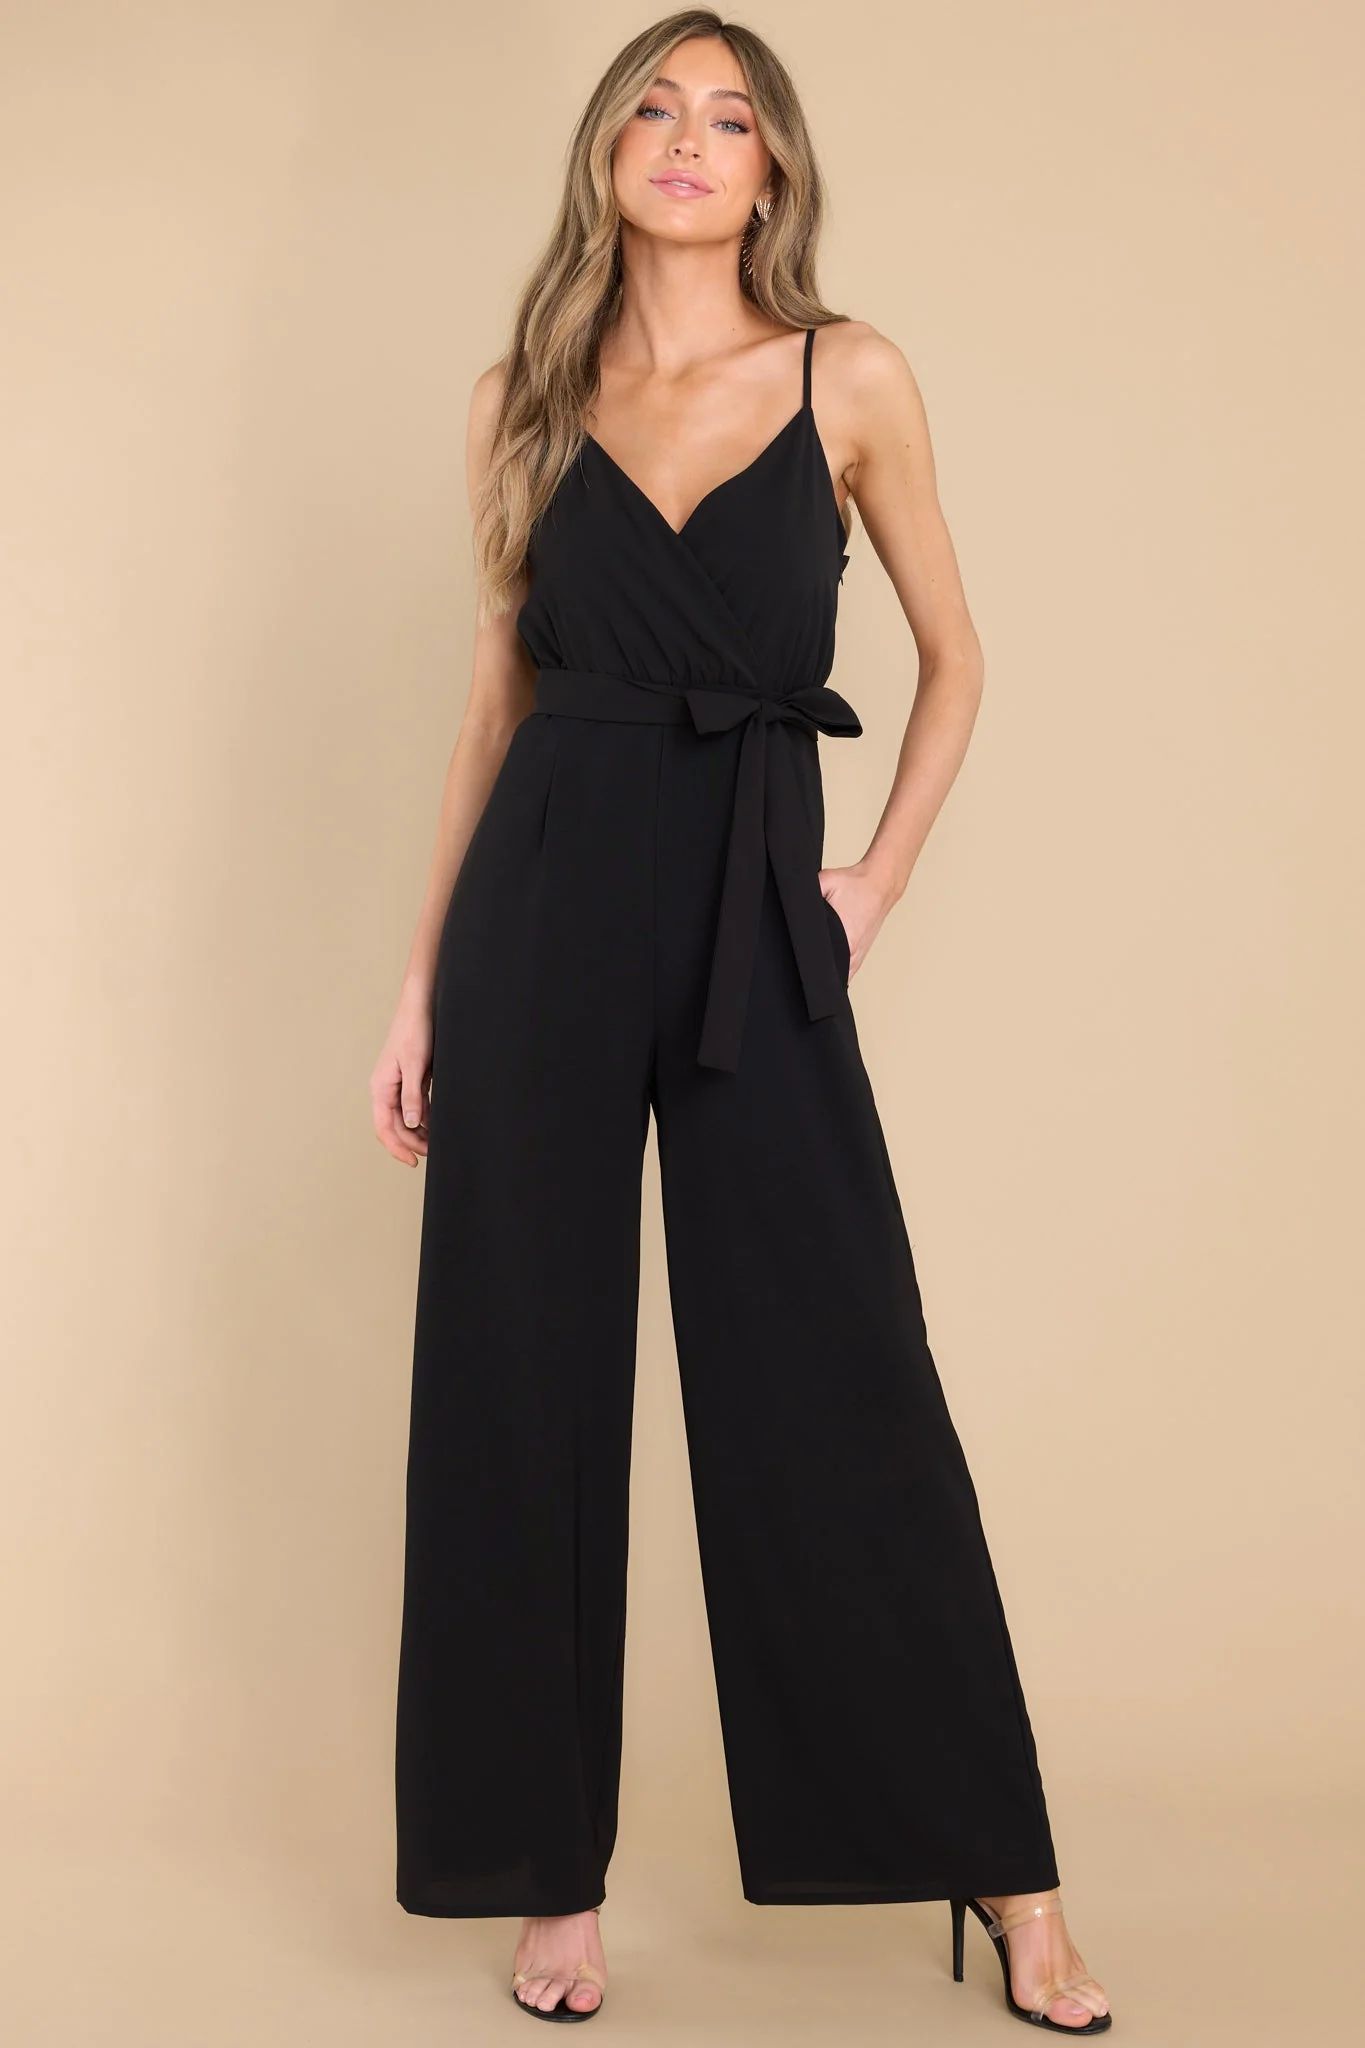 Bad Choices Black Jumpsuit | Red Dress 